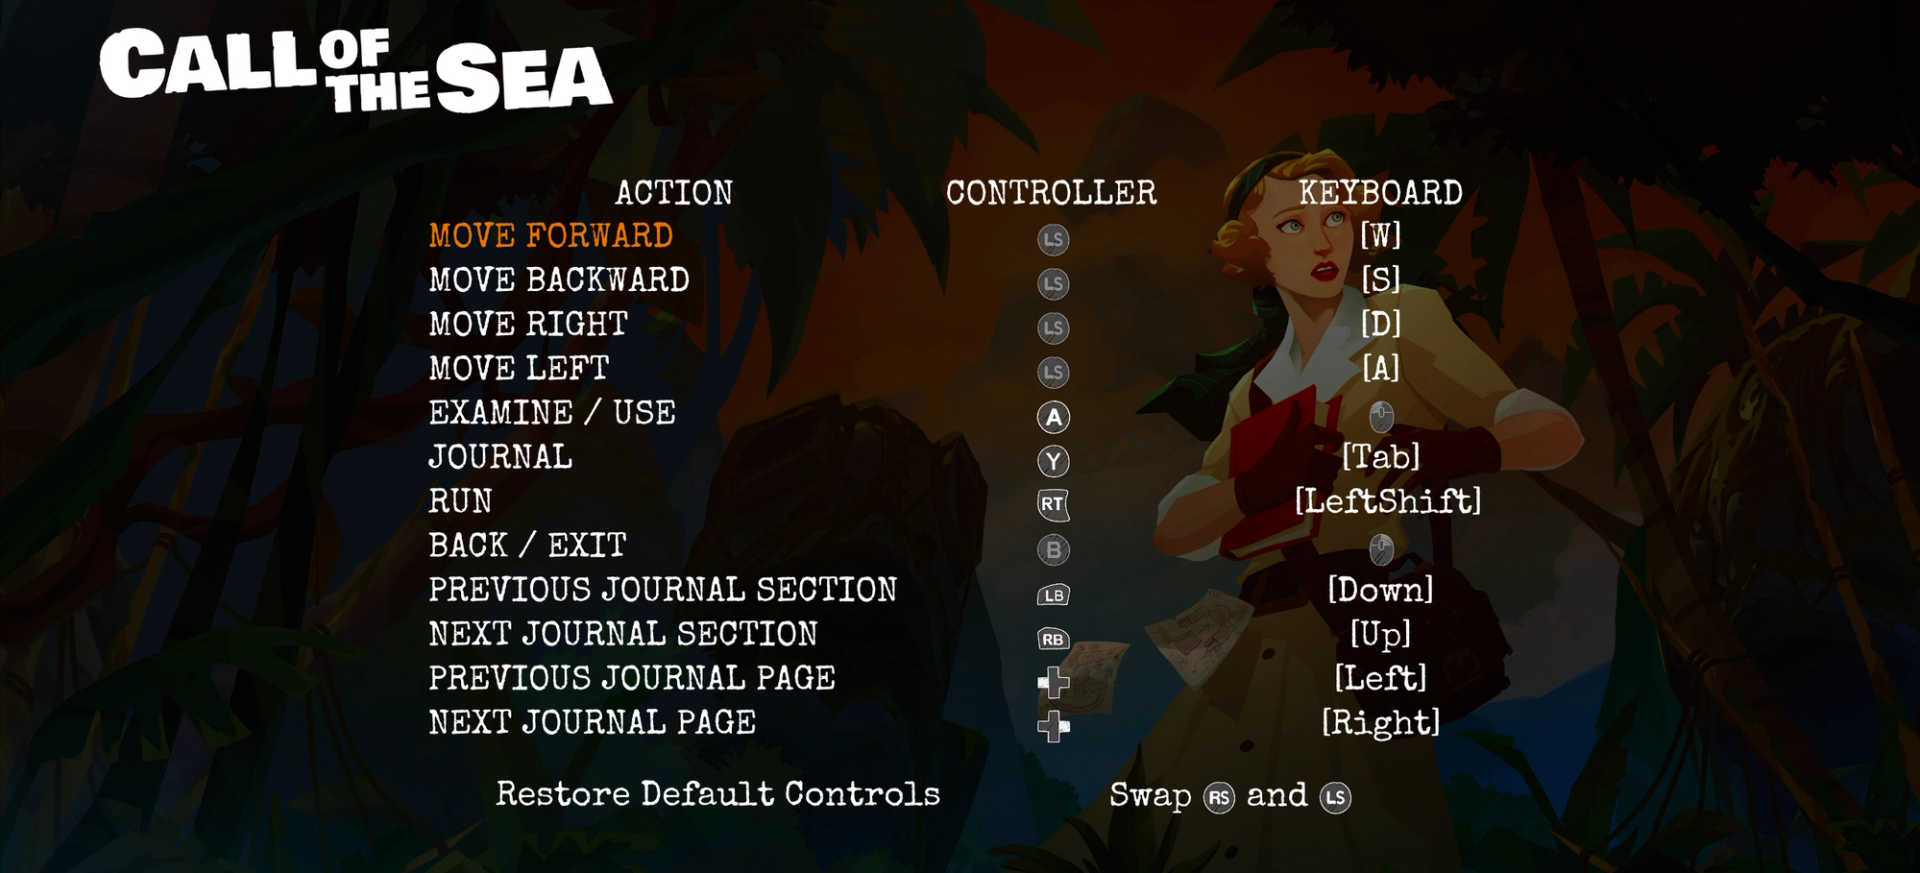 A list of game commands and controller buttons and keyboard keys mapped to each in a menu. Screenshot from Call of the Sea.